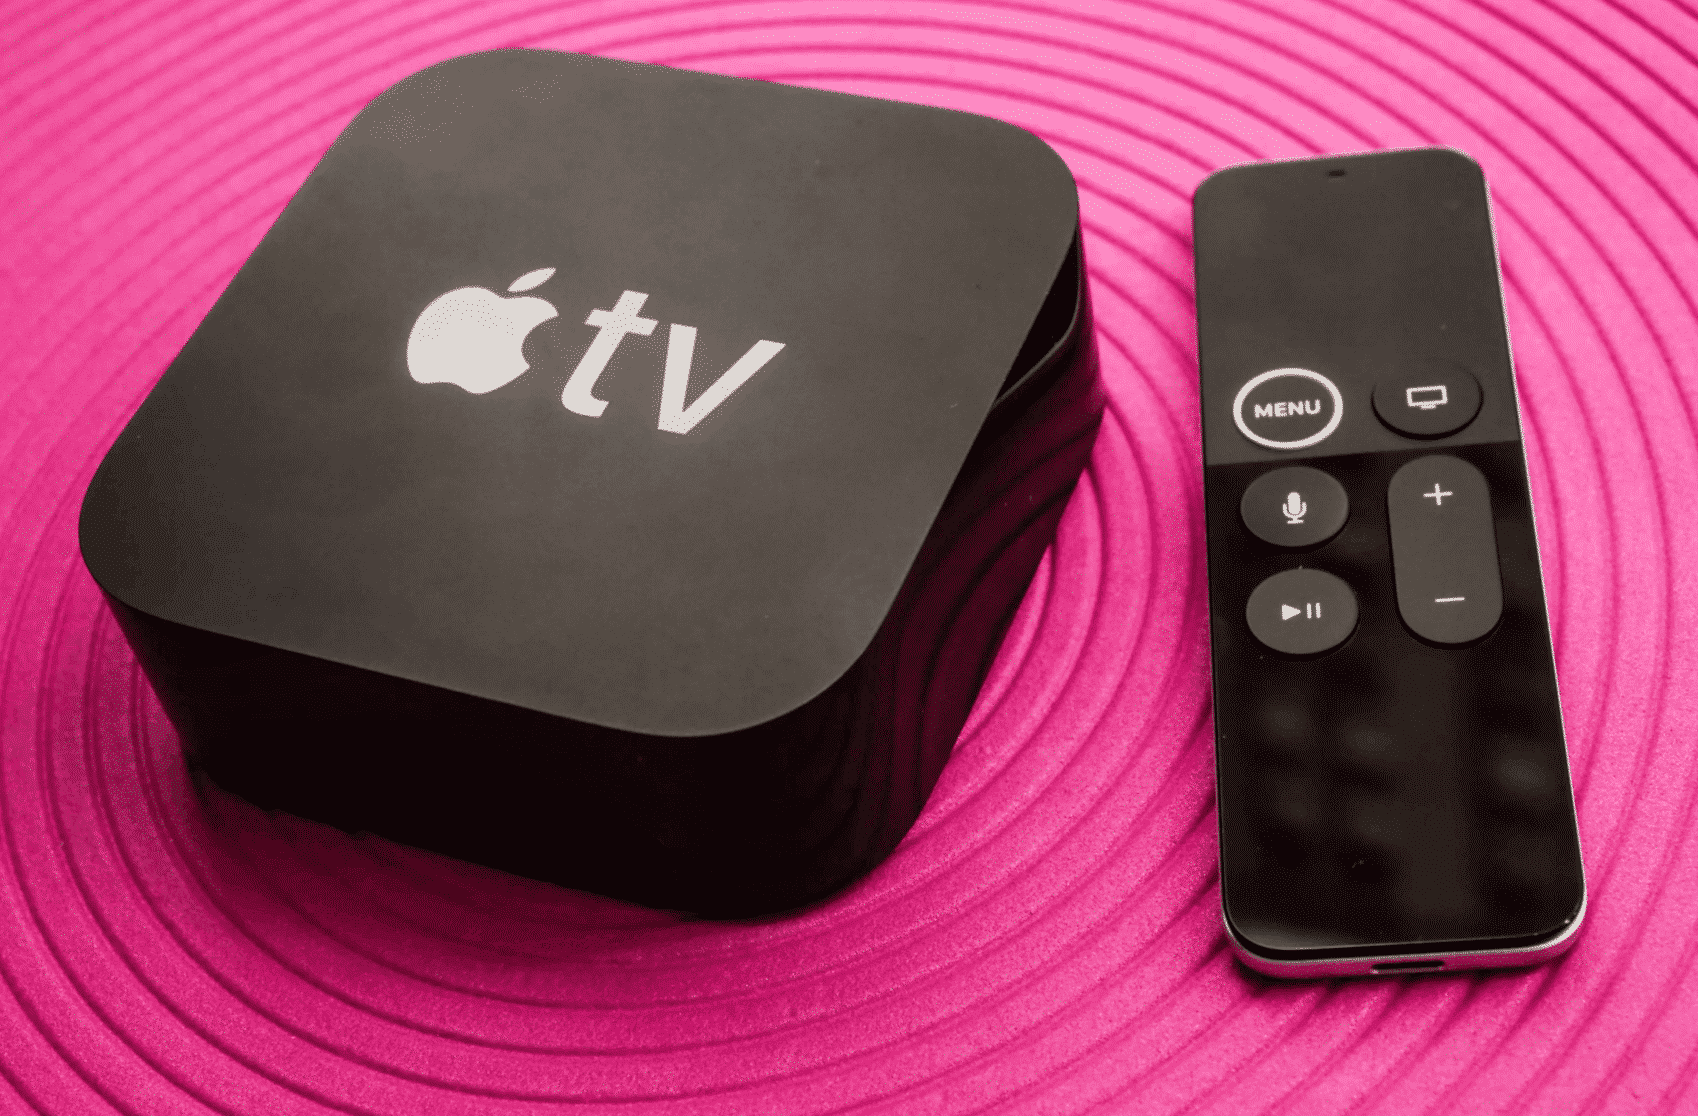 Apple TV 4K that is now on sale for Cyber Monday.